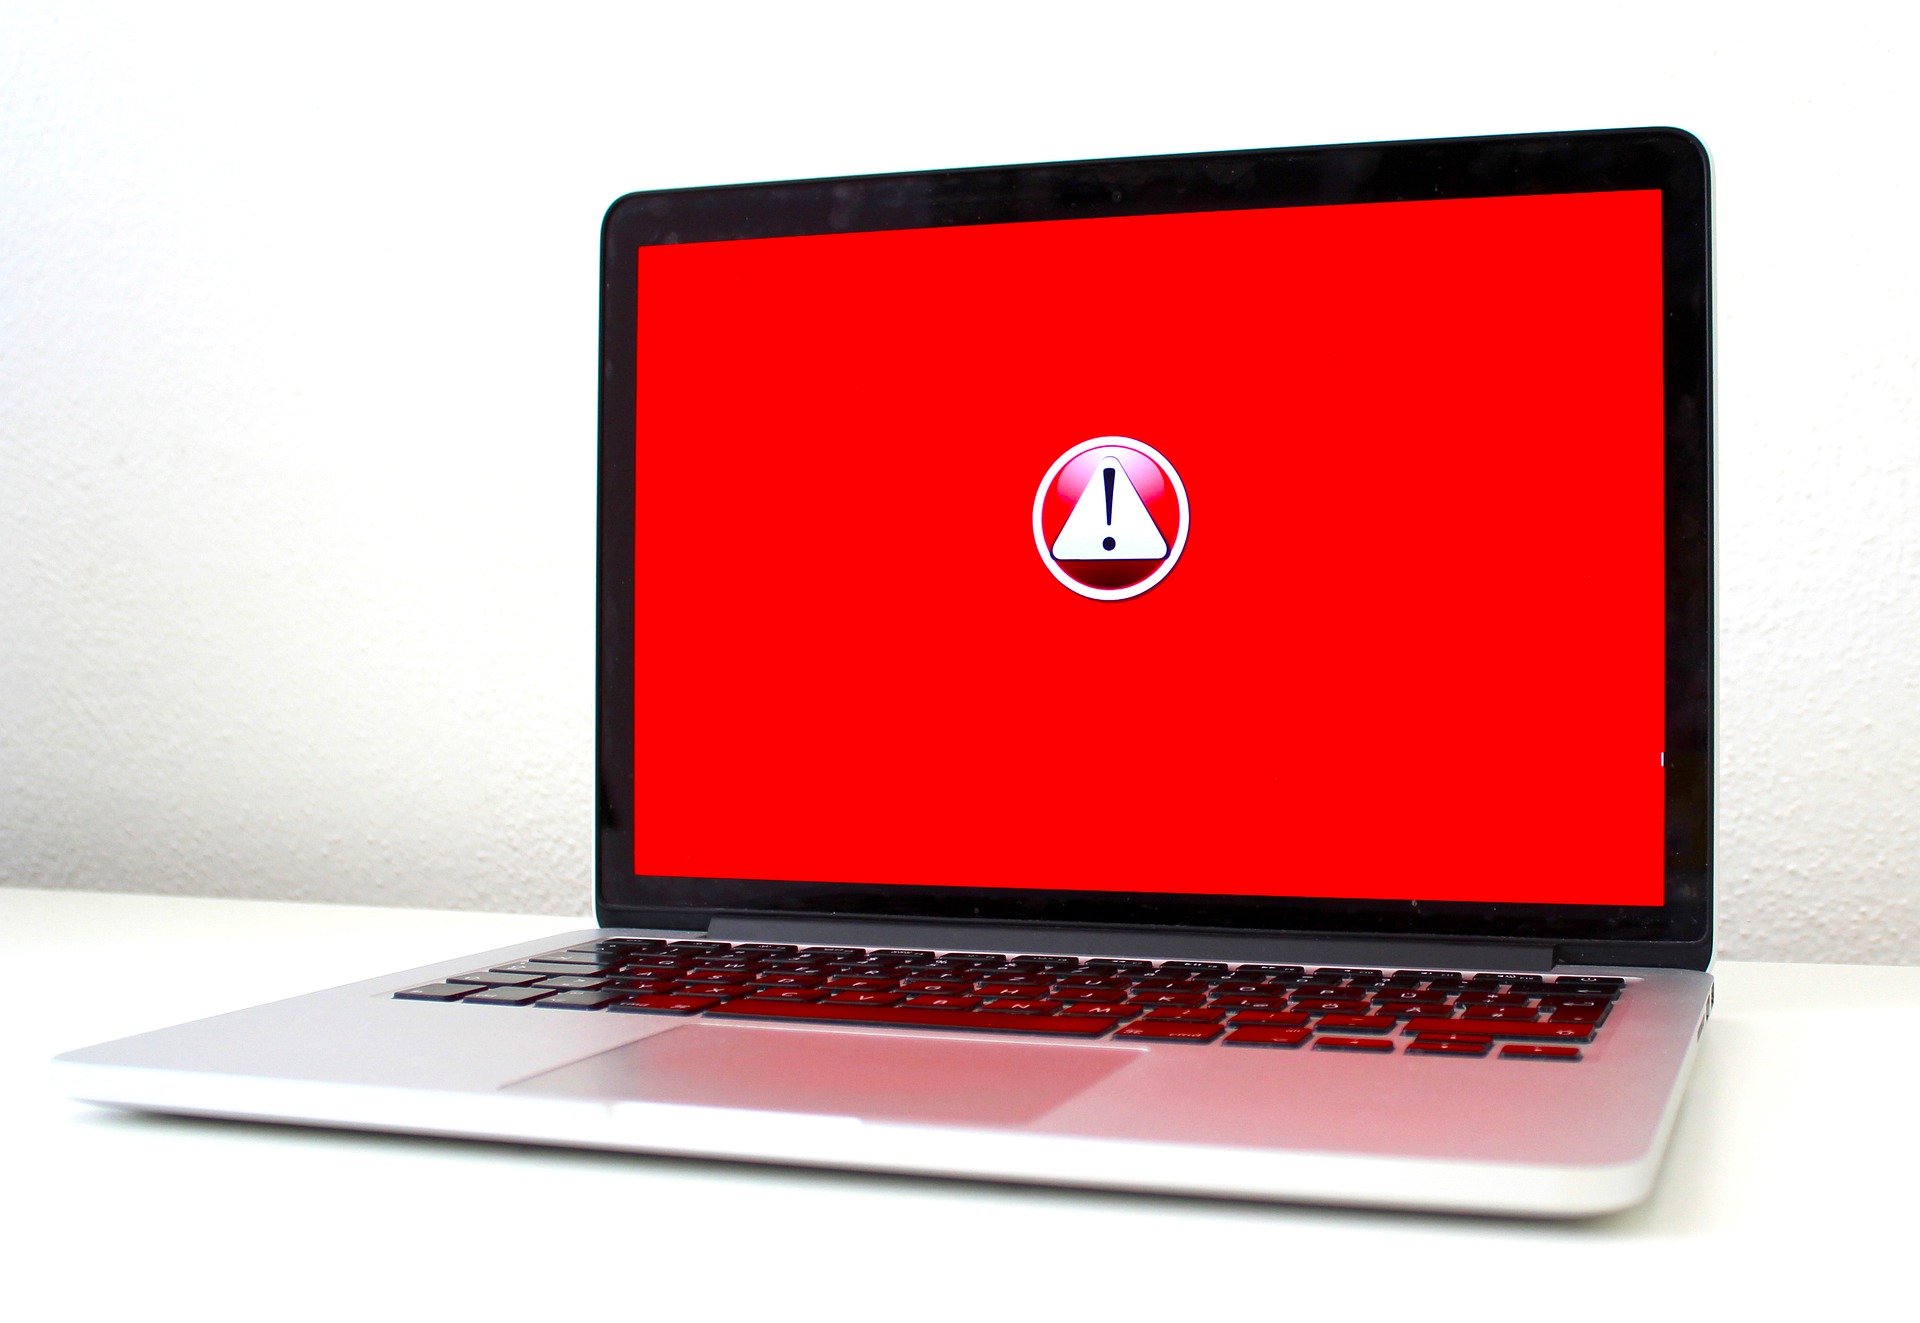 A laptop with a red screen showing an error